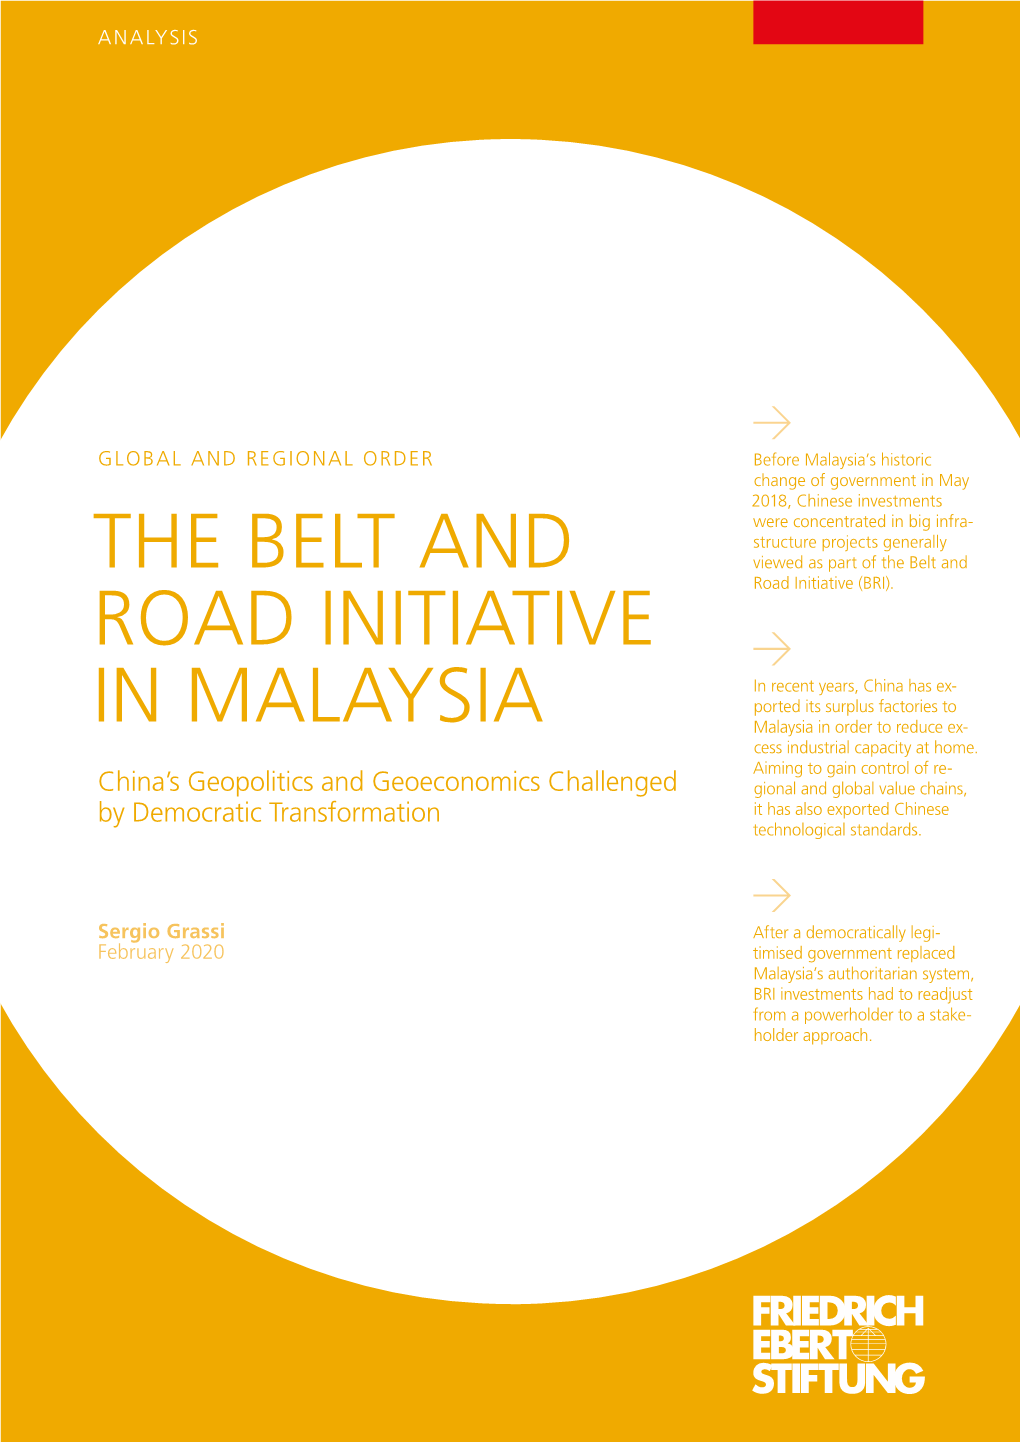 The Belt and Road Initiative in Malaysia